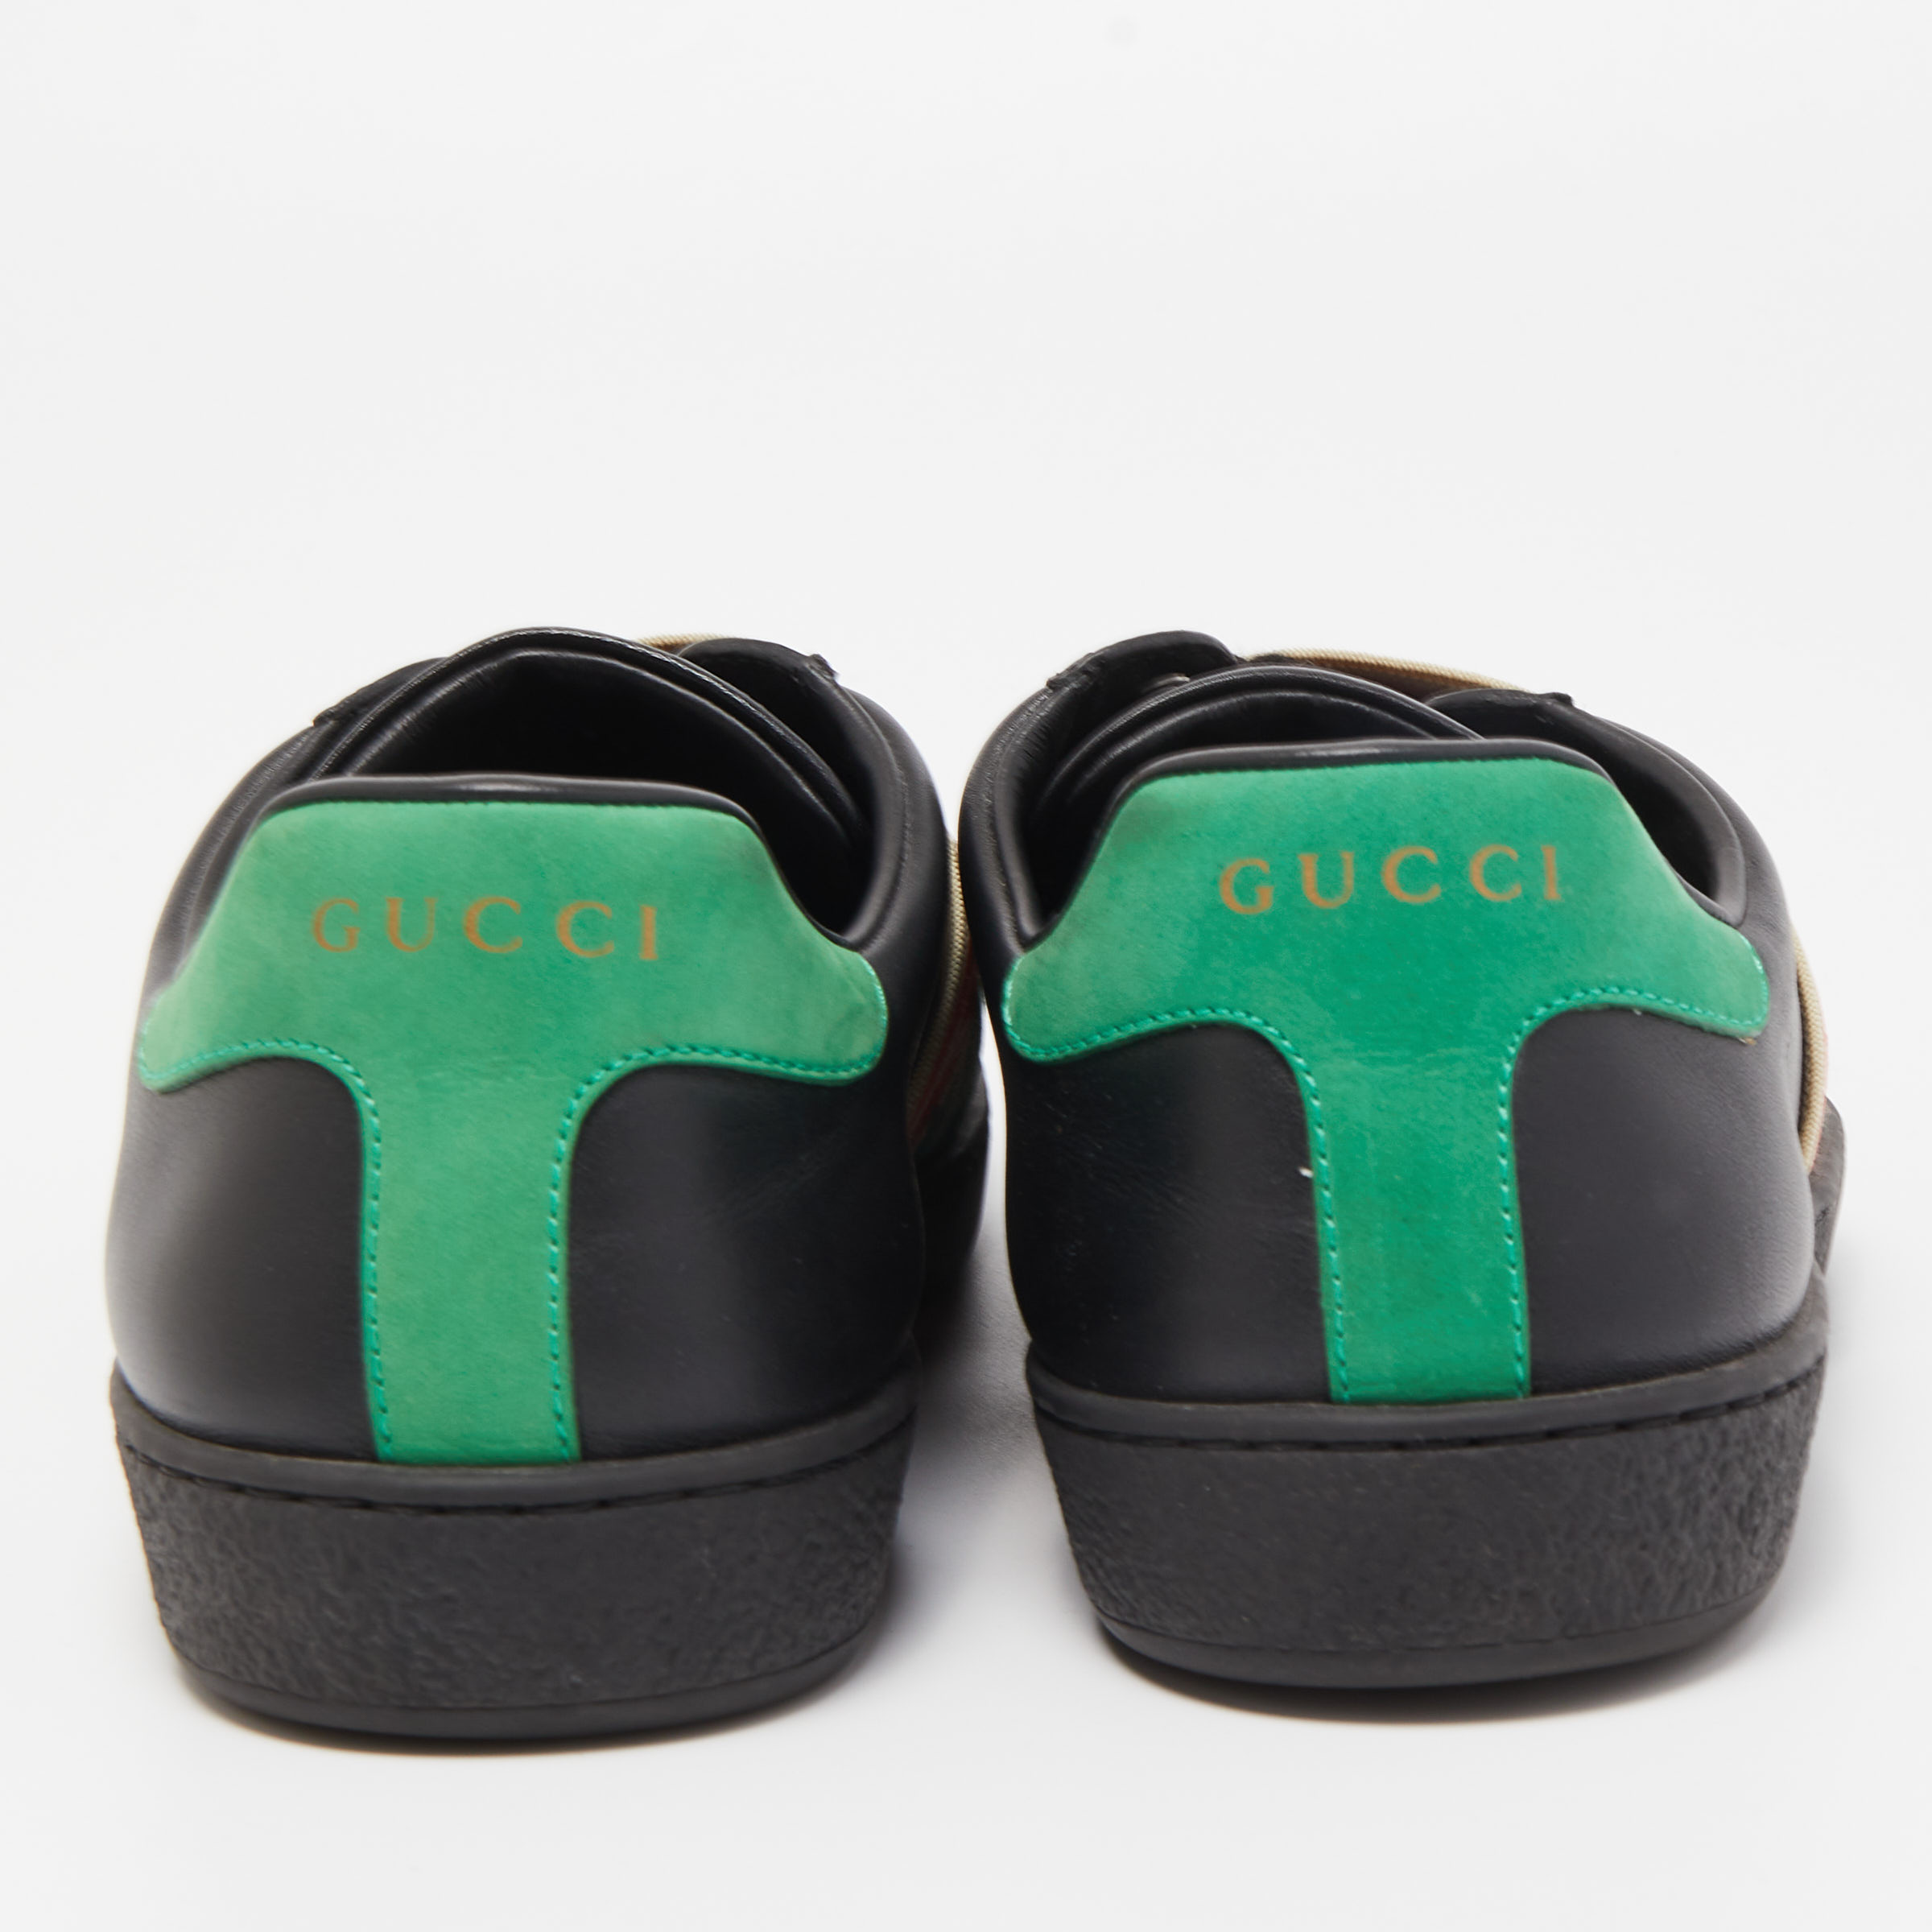 Gucci Black Leather Web Ace Sneakers Size 39.5